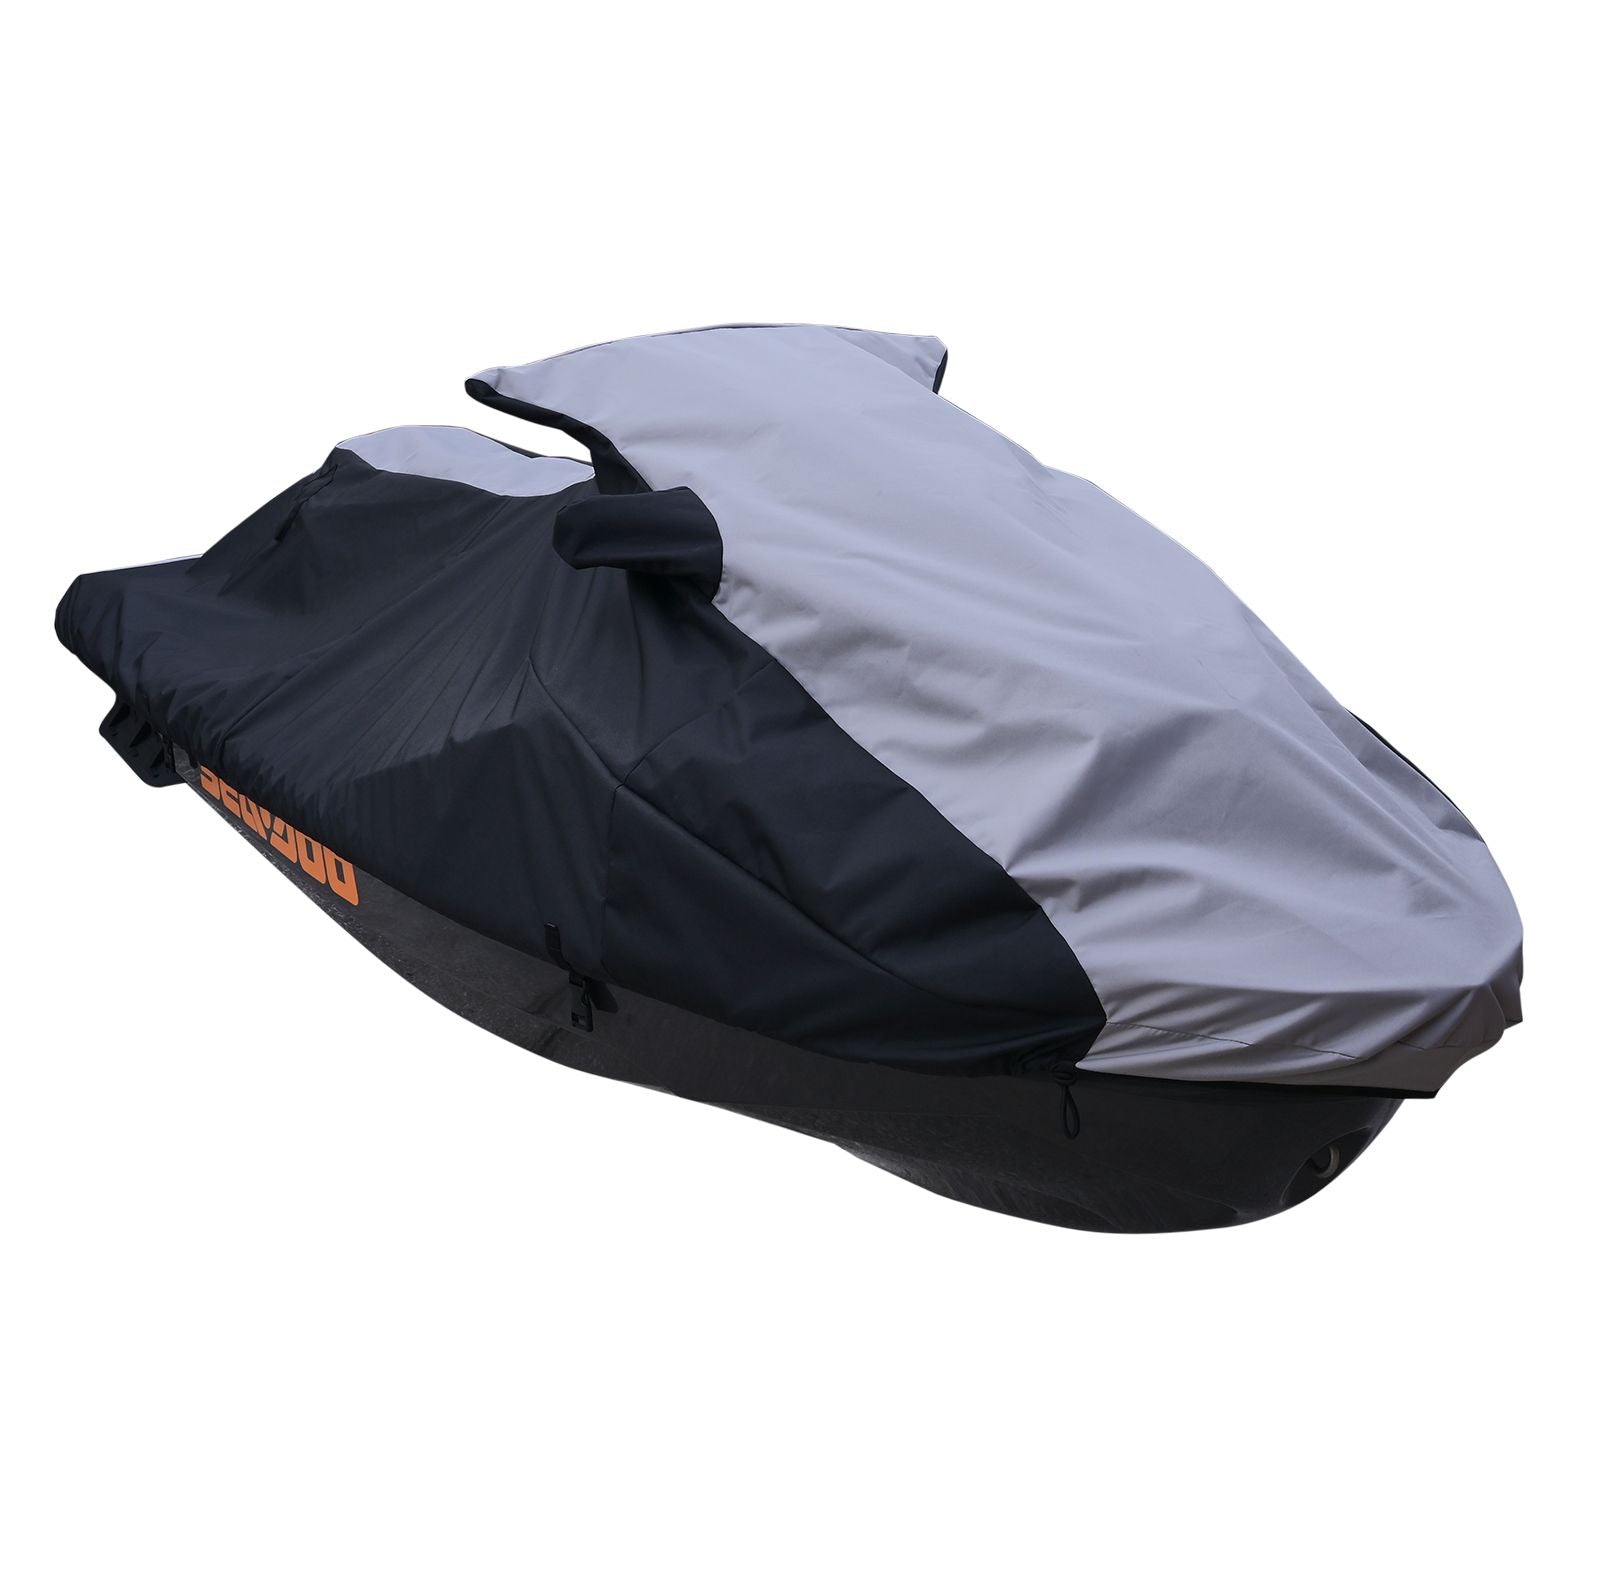 Trailerable Storage cover with vents for Yamaha 2005-2009 Wave Runner VX110 Deluxe & Cruiser